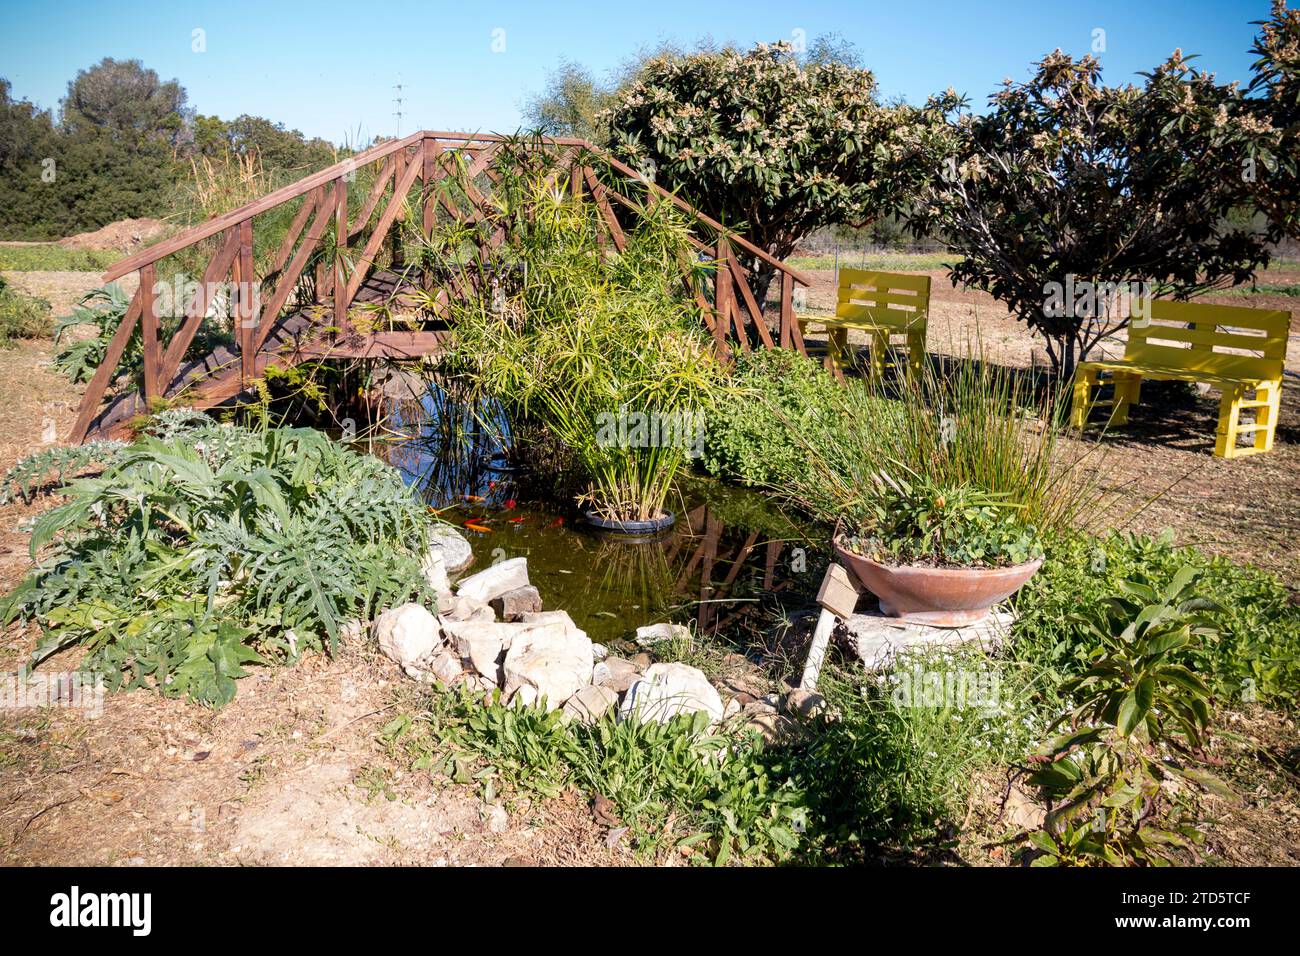 Small wooden bridge over a pond with carp and lush vegetation Stock Photo